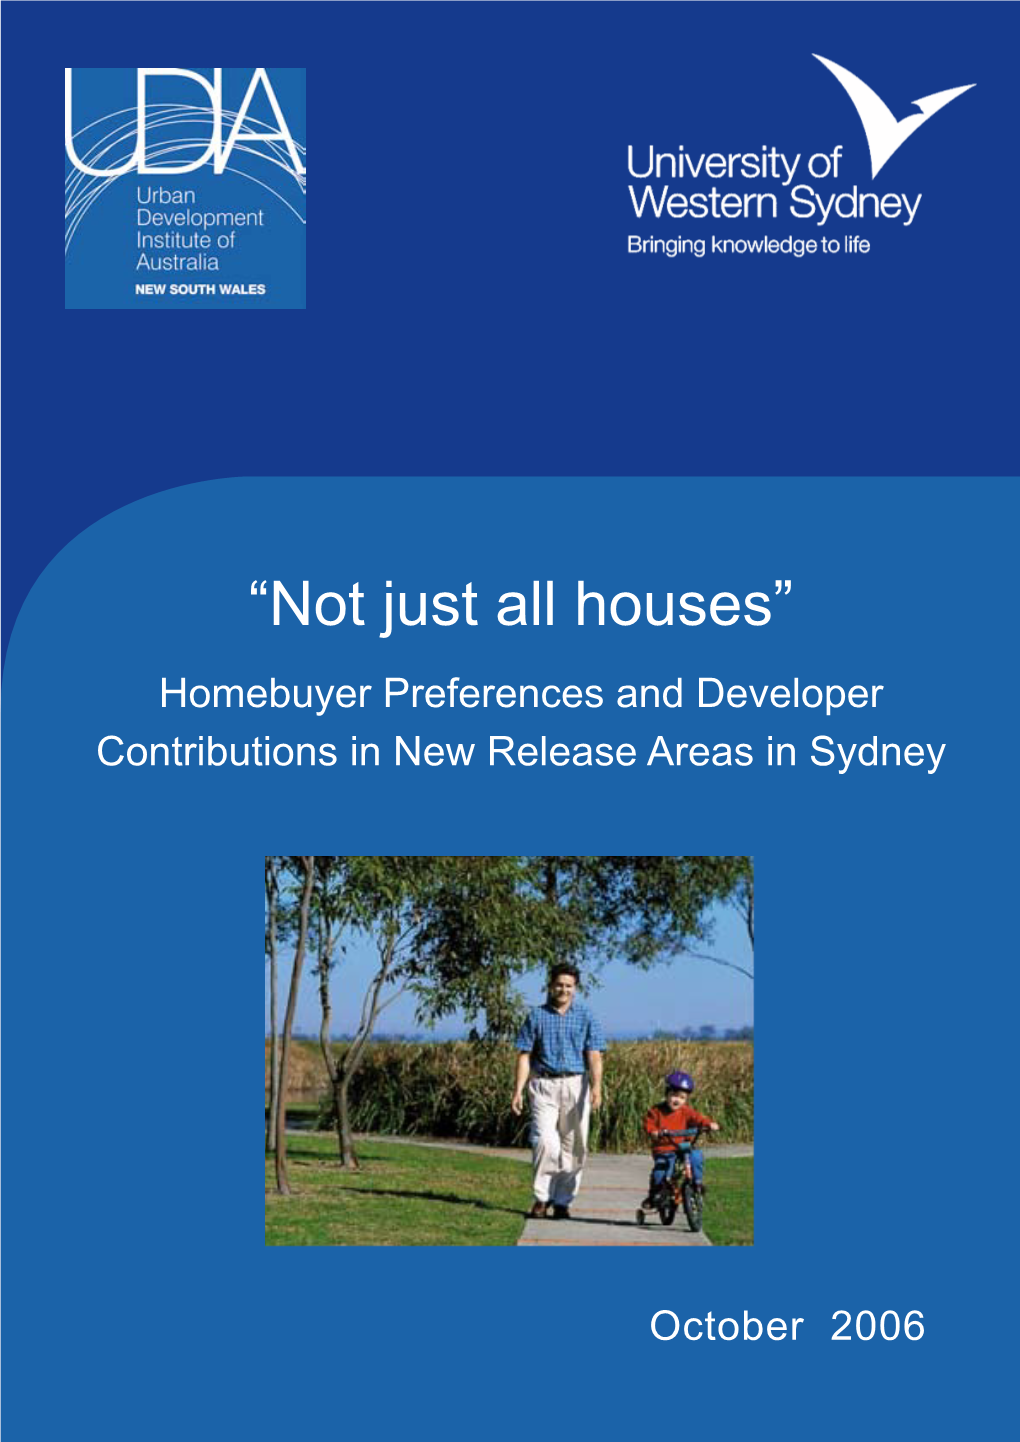 “Not Just All Houses” Homebuyer Preferences and Developer Contributions in New Release Areas in Sydney